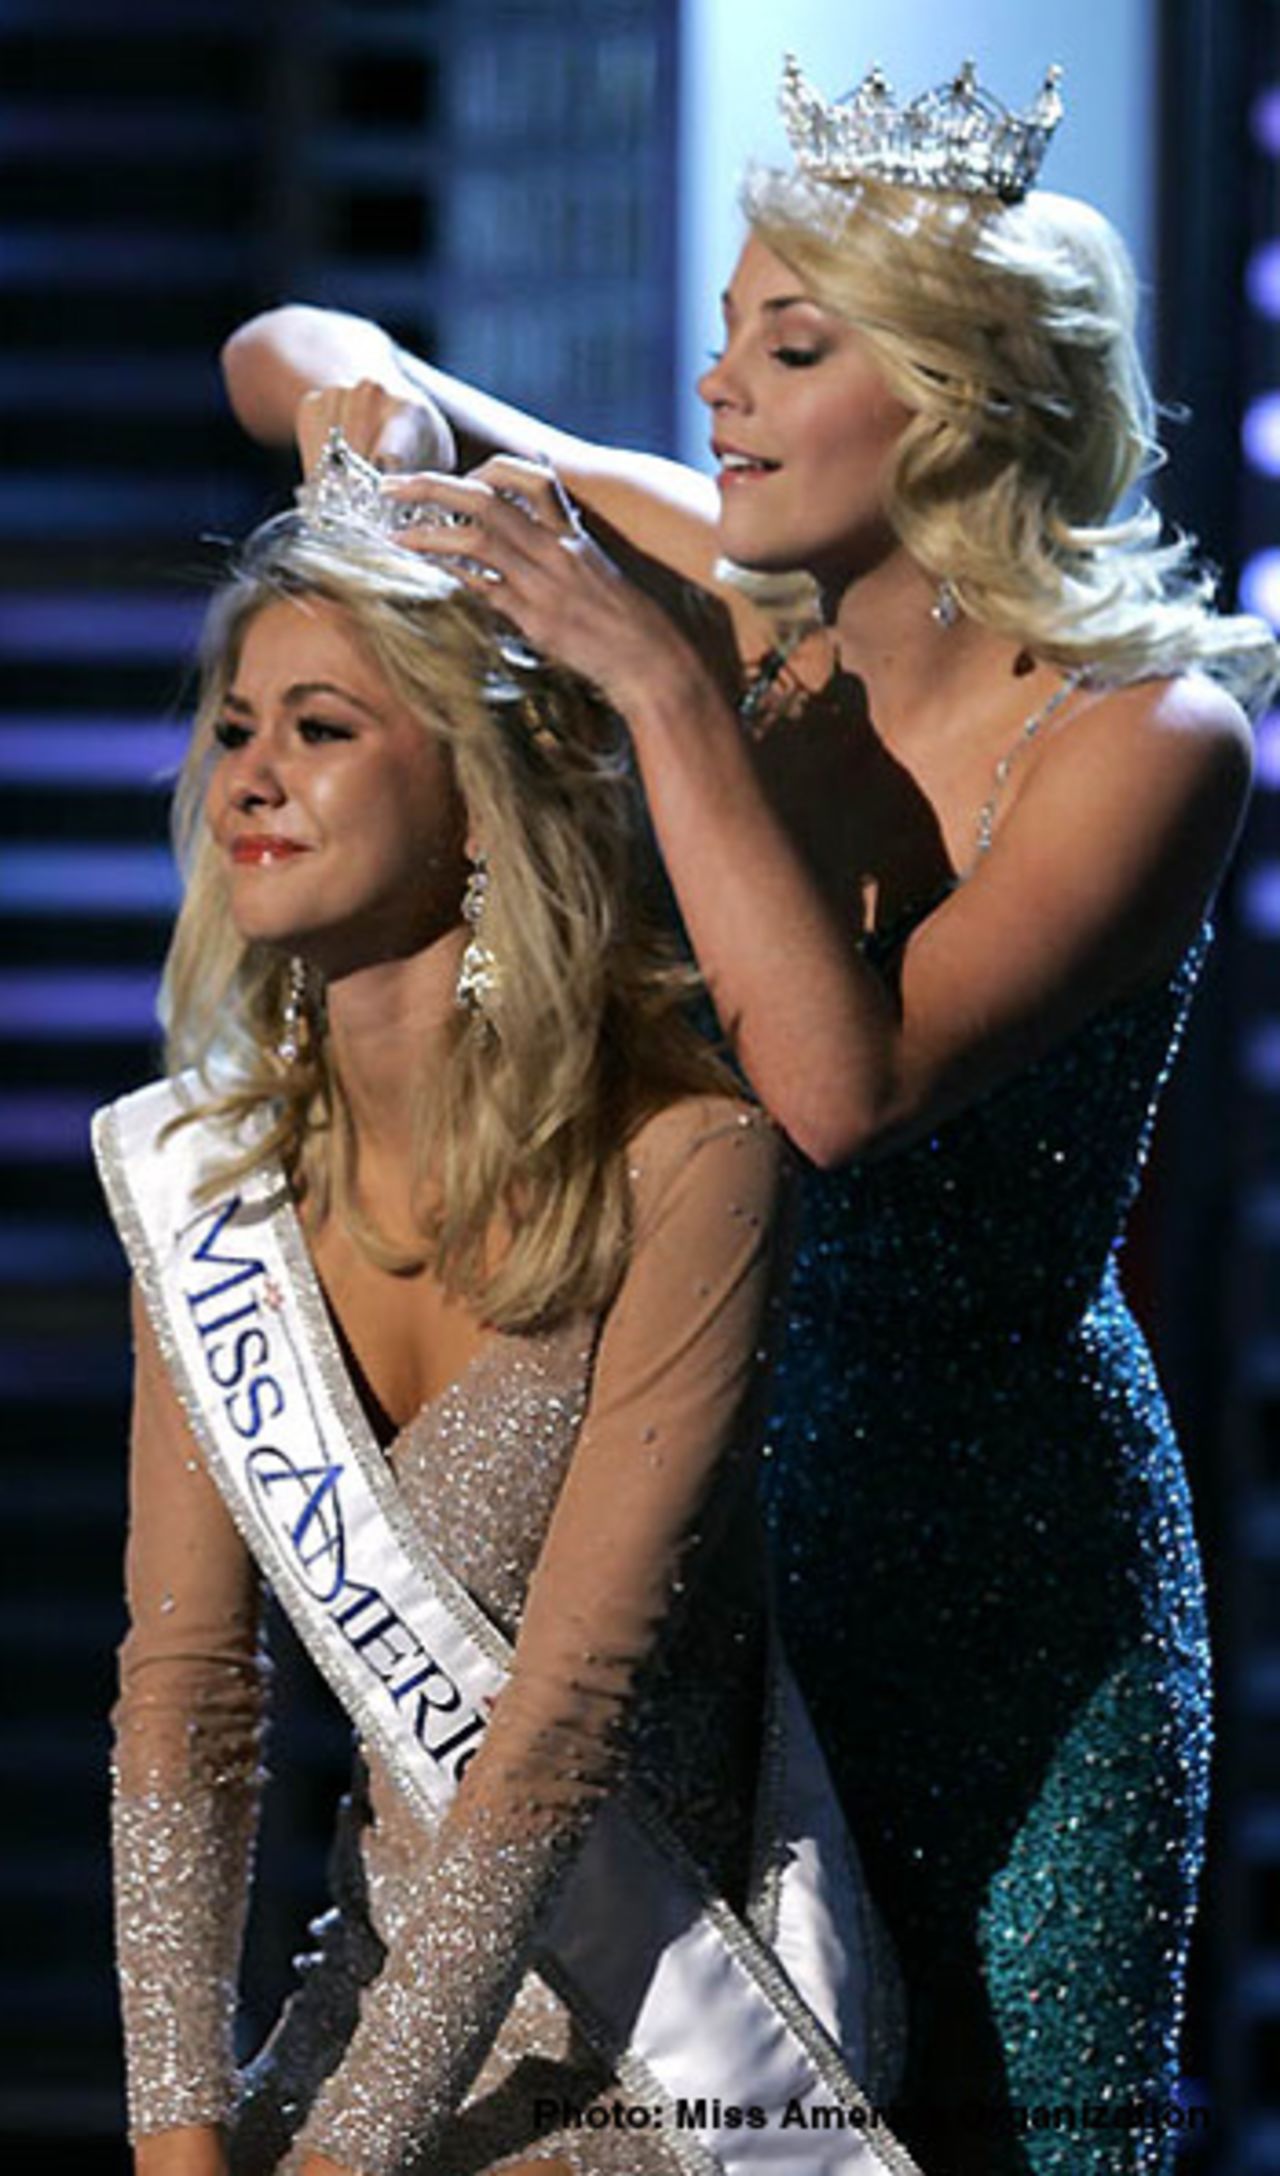 Haglund, at the time 19 years old, is crowned Miss America 2008.